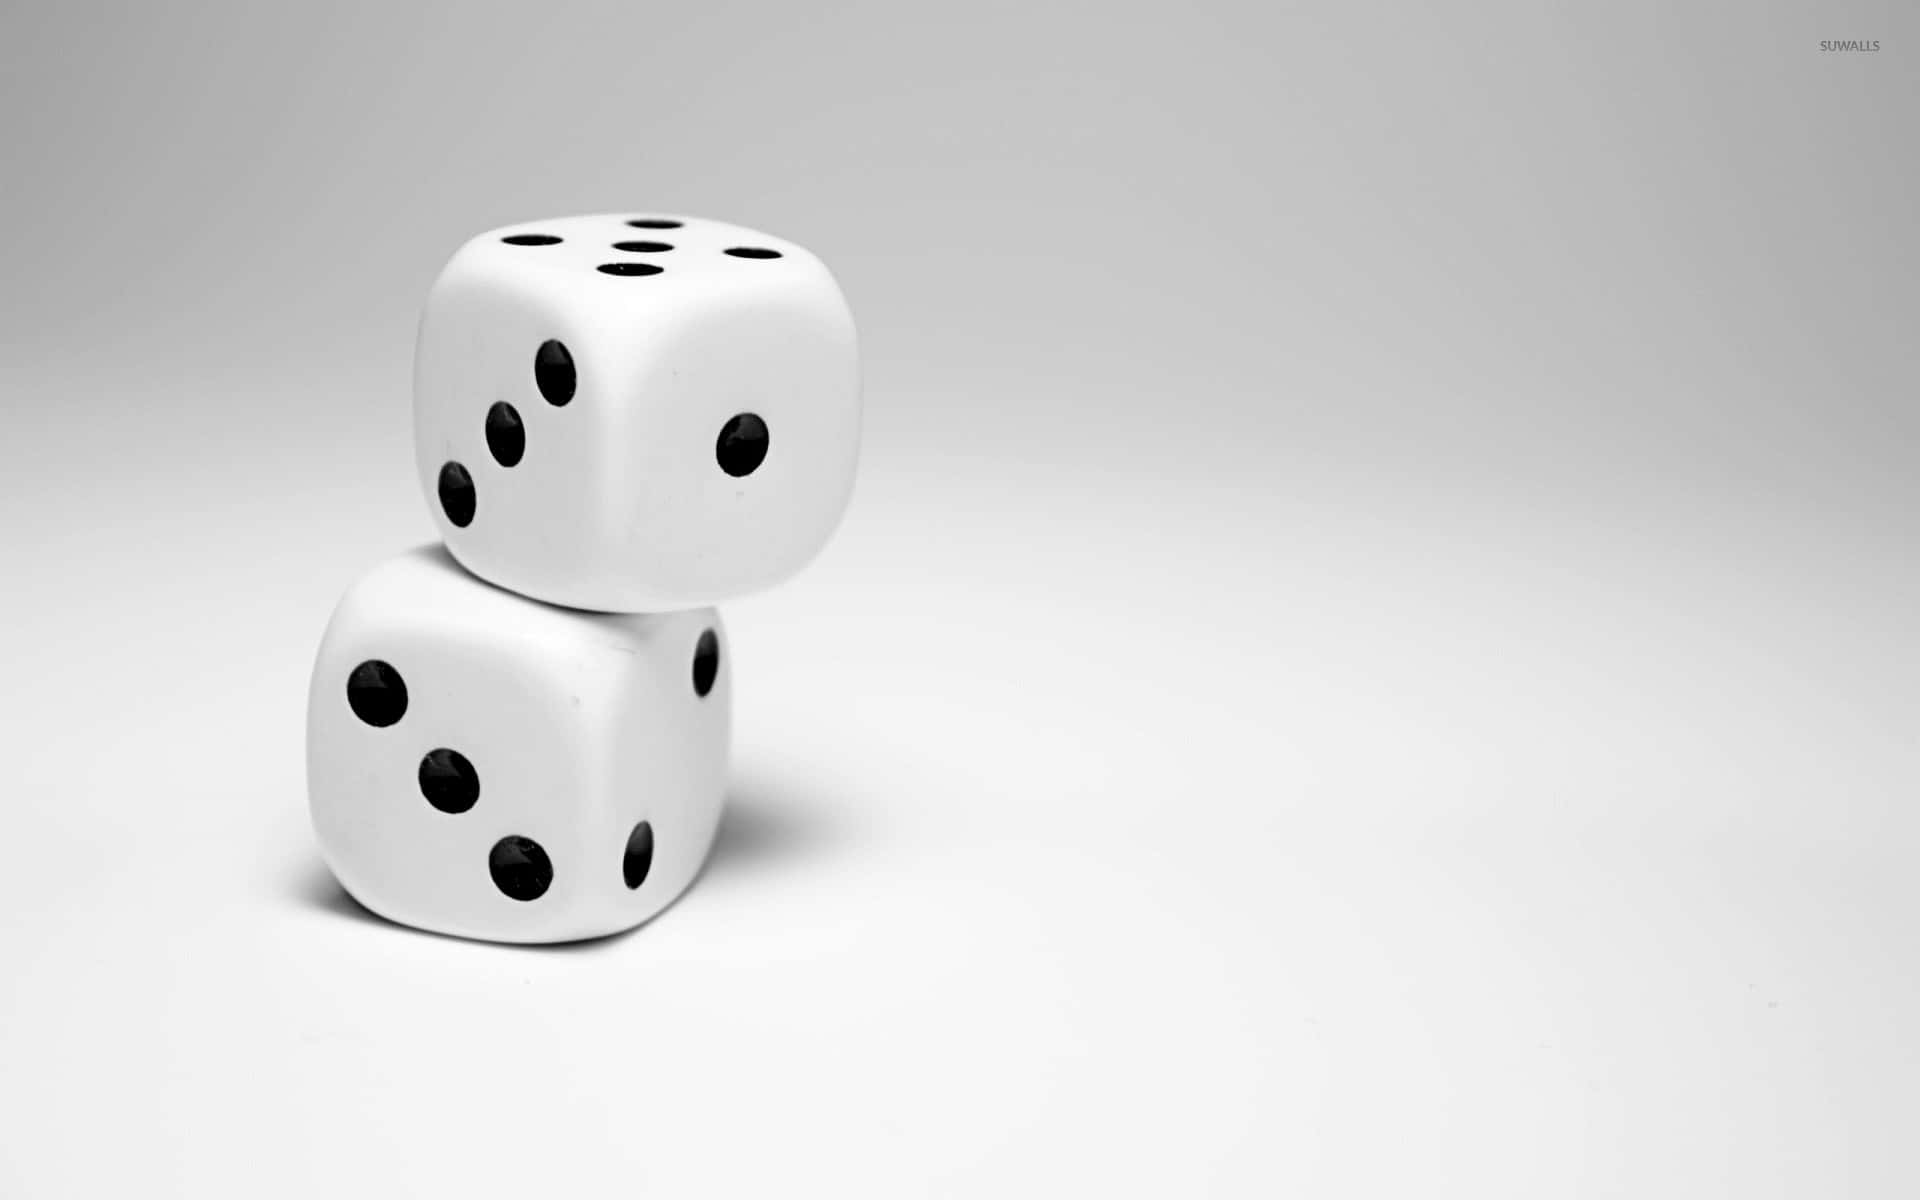 Stacked White Dice Gray Background.jpg Background